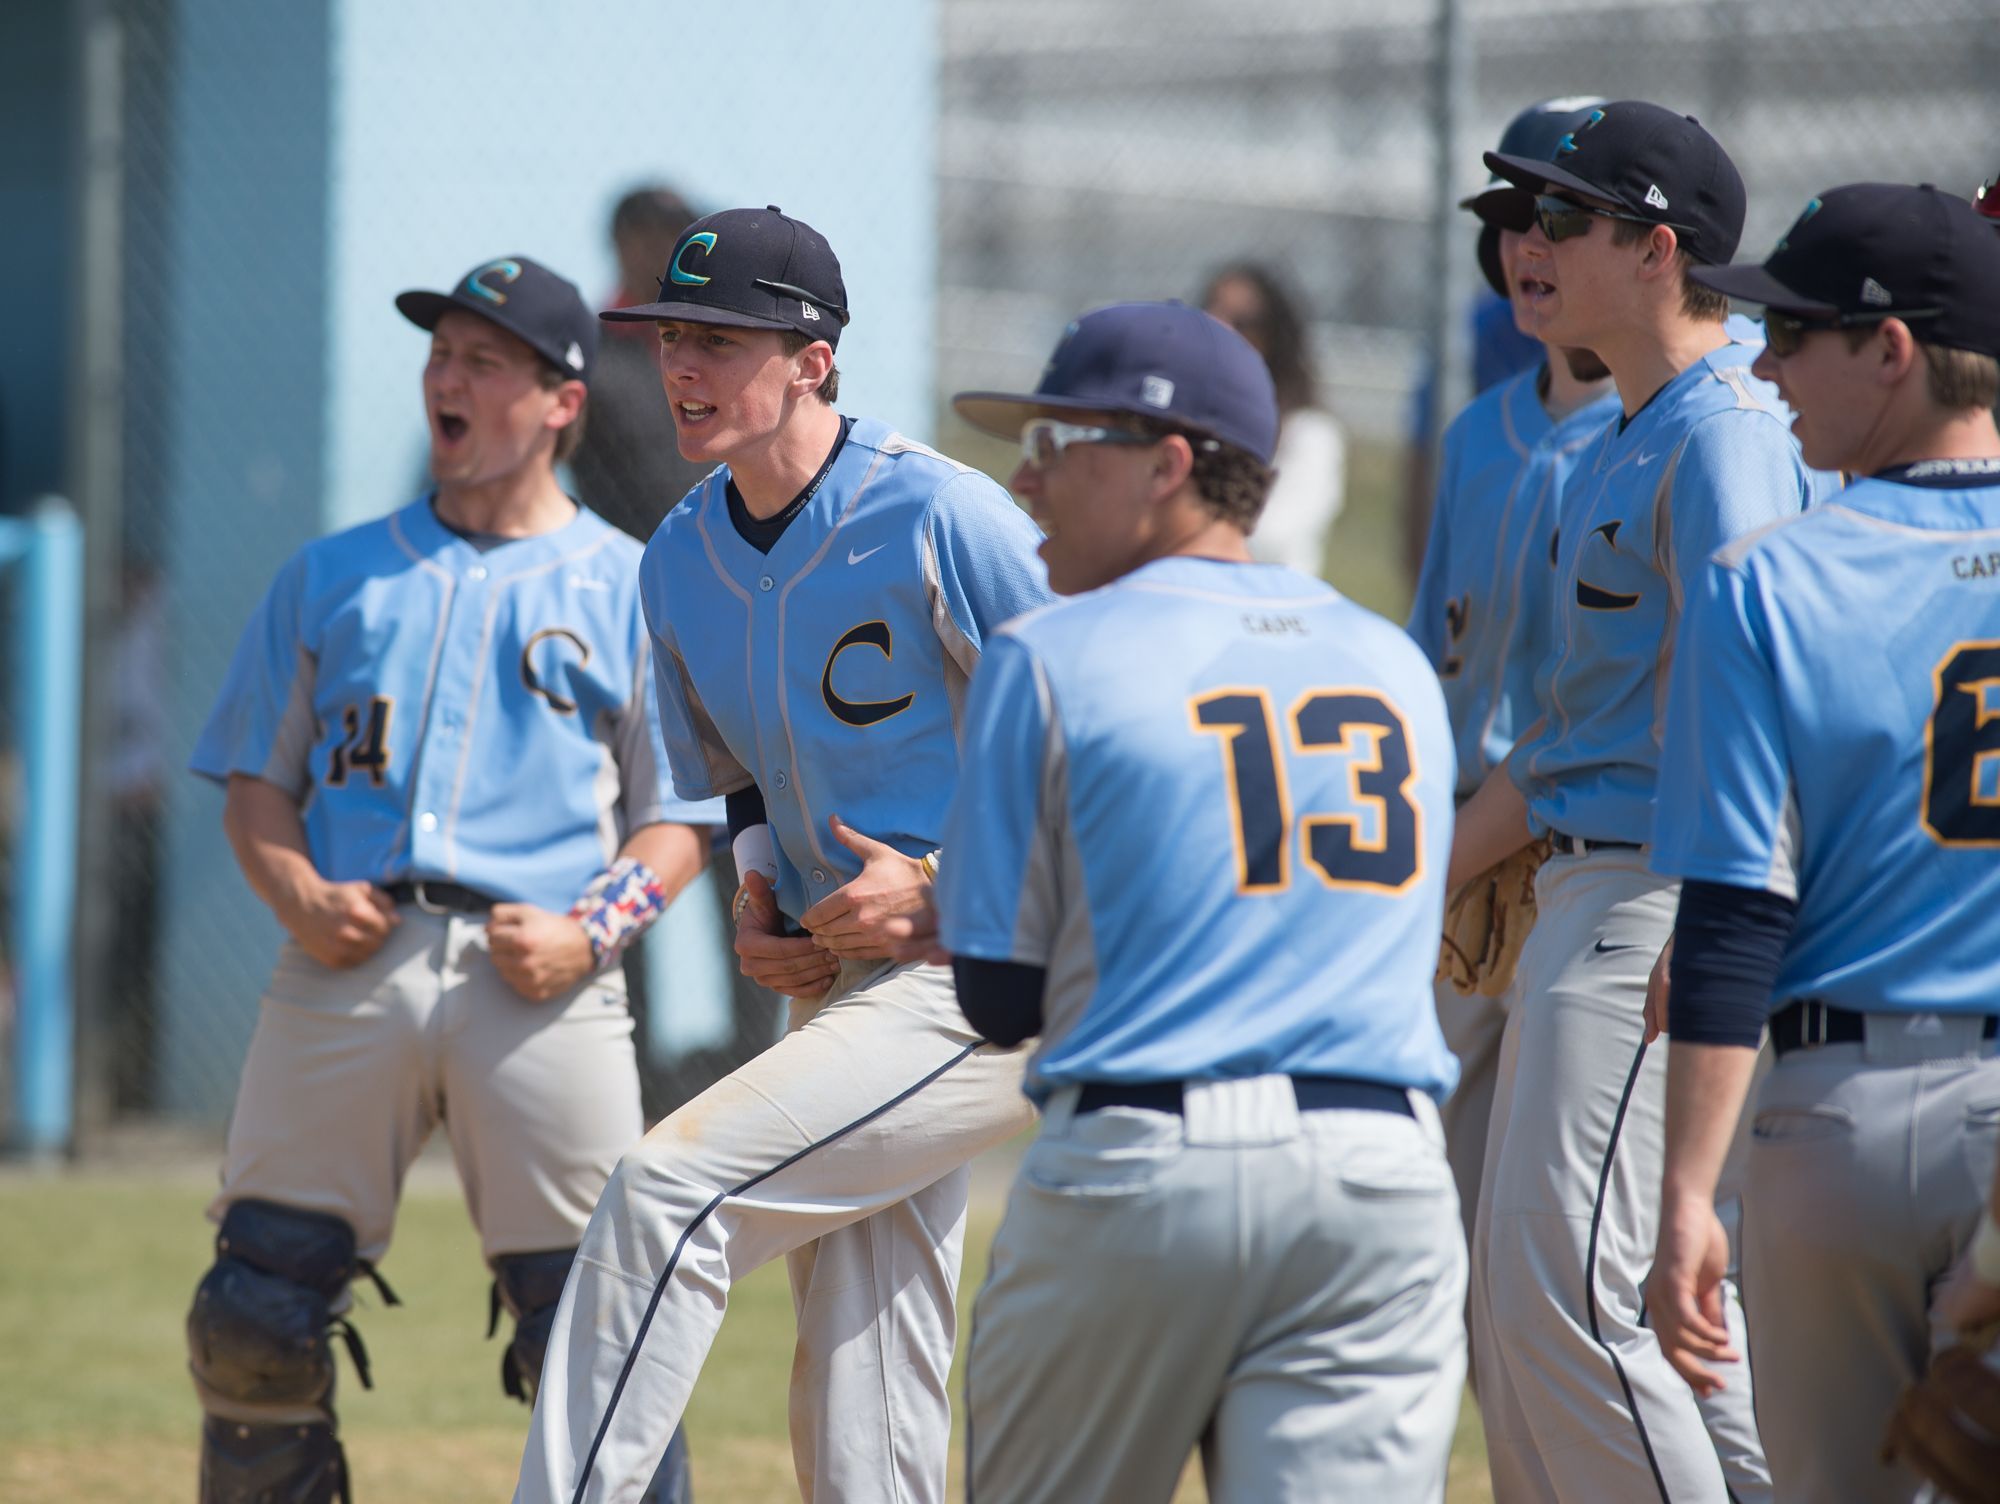 Cape Henlopen's team celebrates at home plate after Zachary Dale (10) hit a home run in their home game against Caravel.